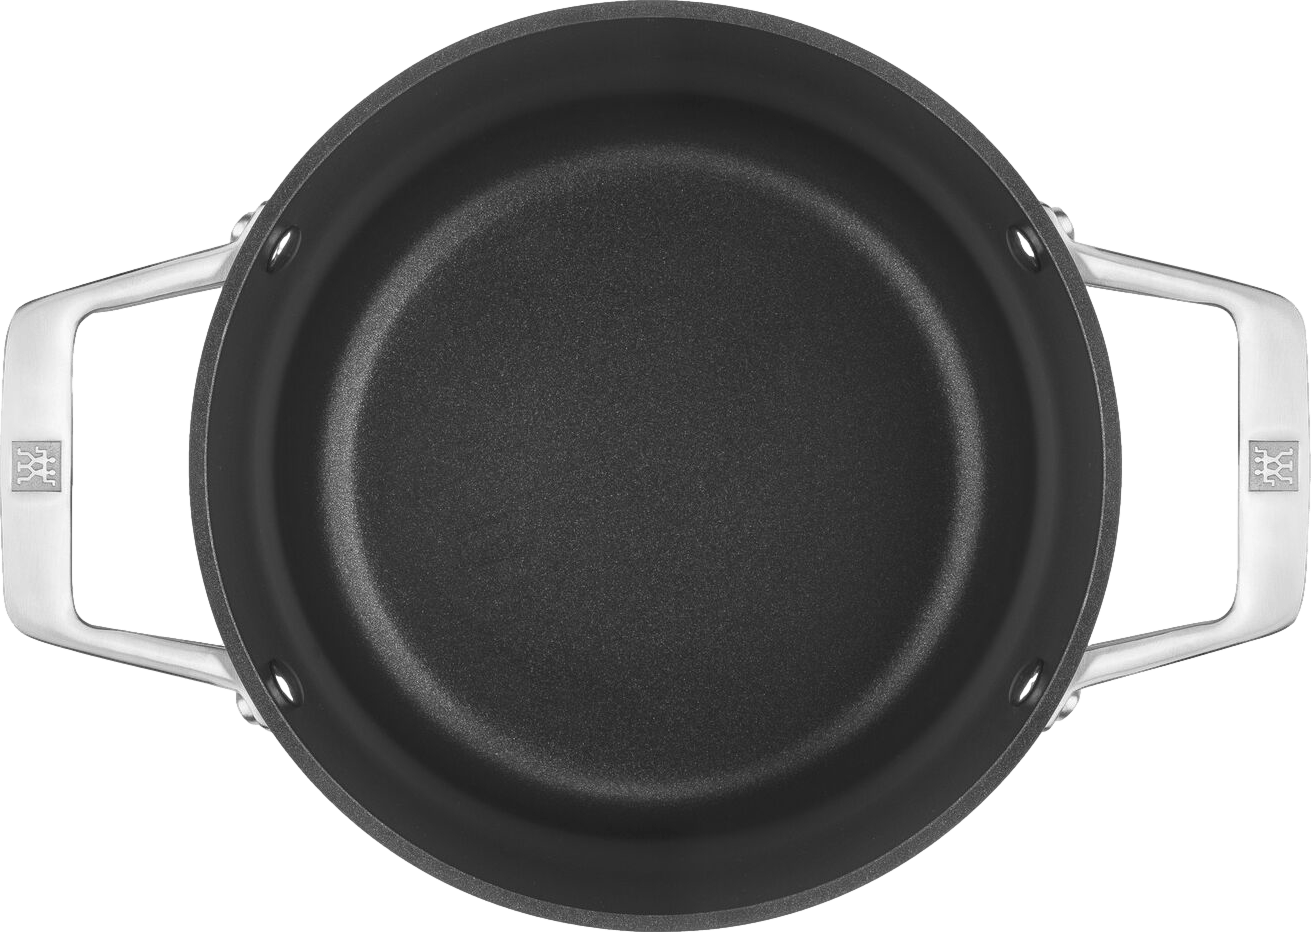 ZWILLING Motion Hard Anodized Aluminum Nonstick Fry Pan